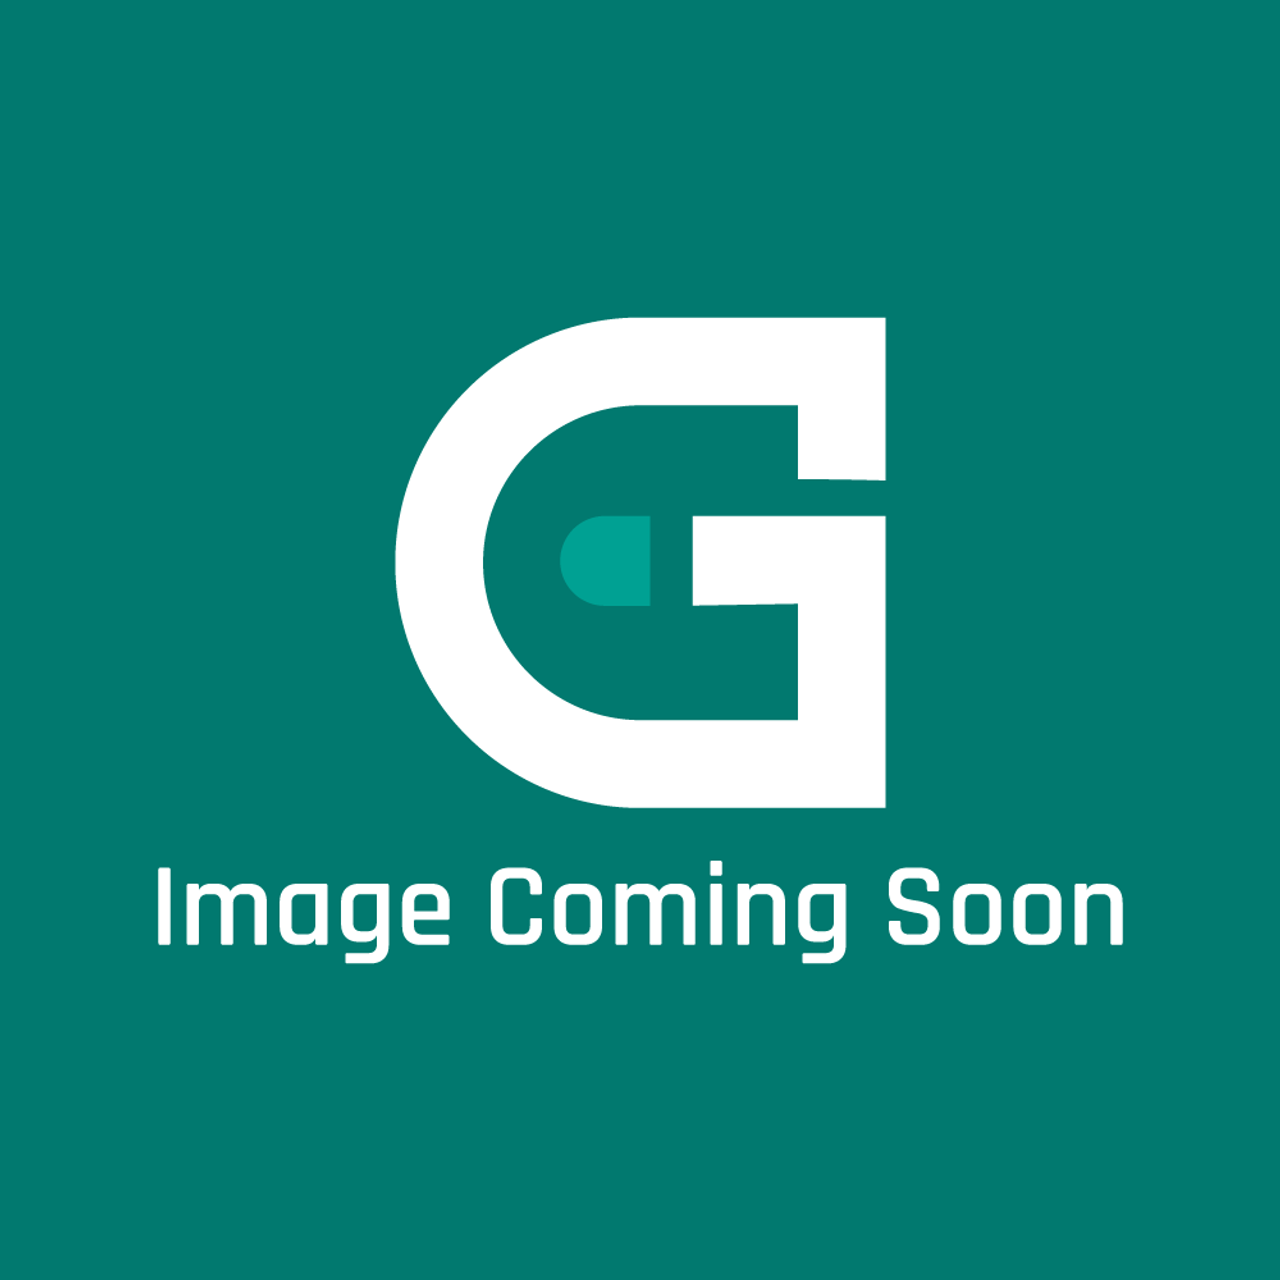 GE Appliances WR87X38745 - Suction Jumper Tube - Image Coming Soon!